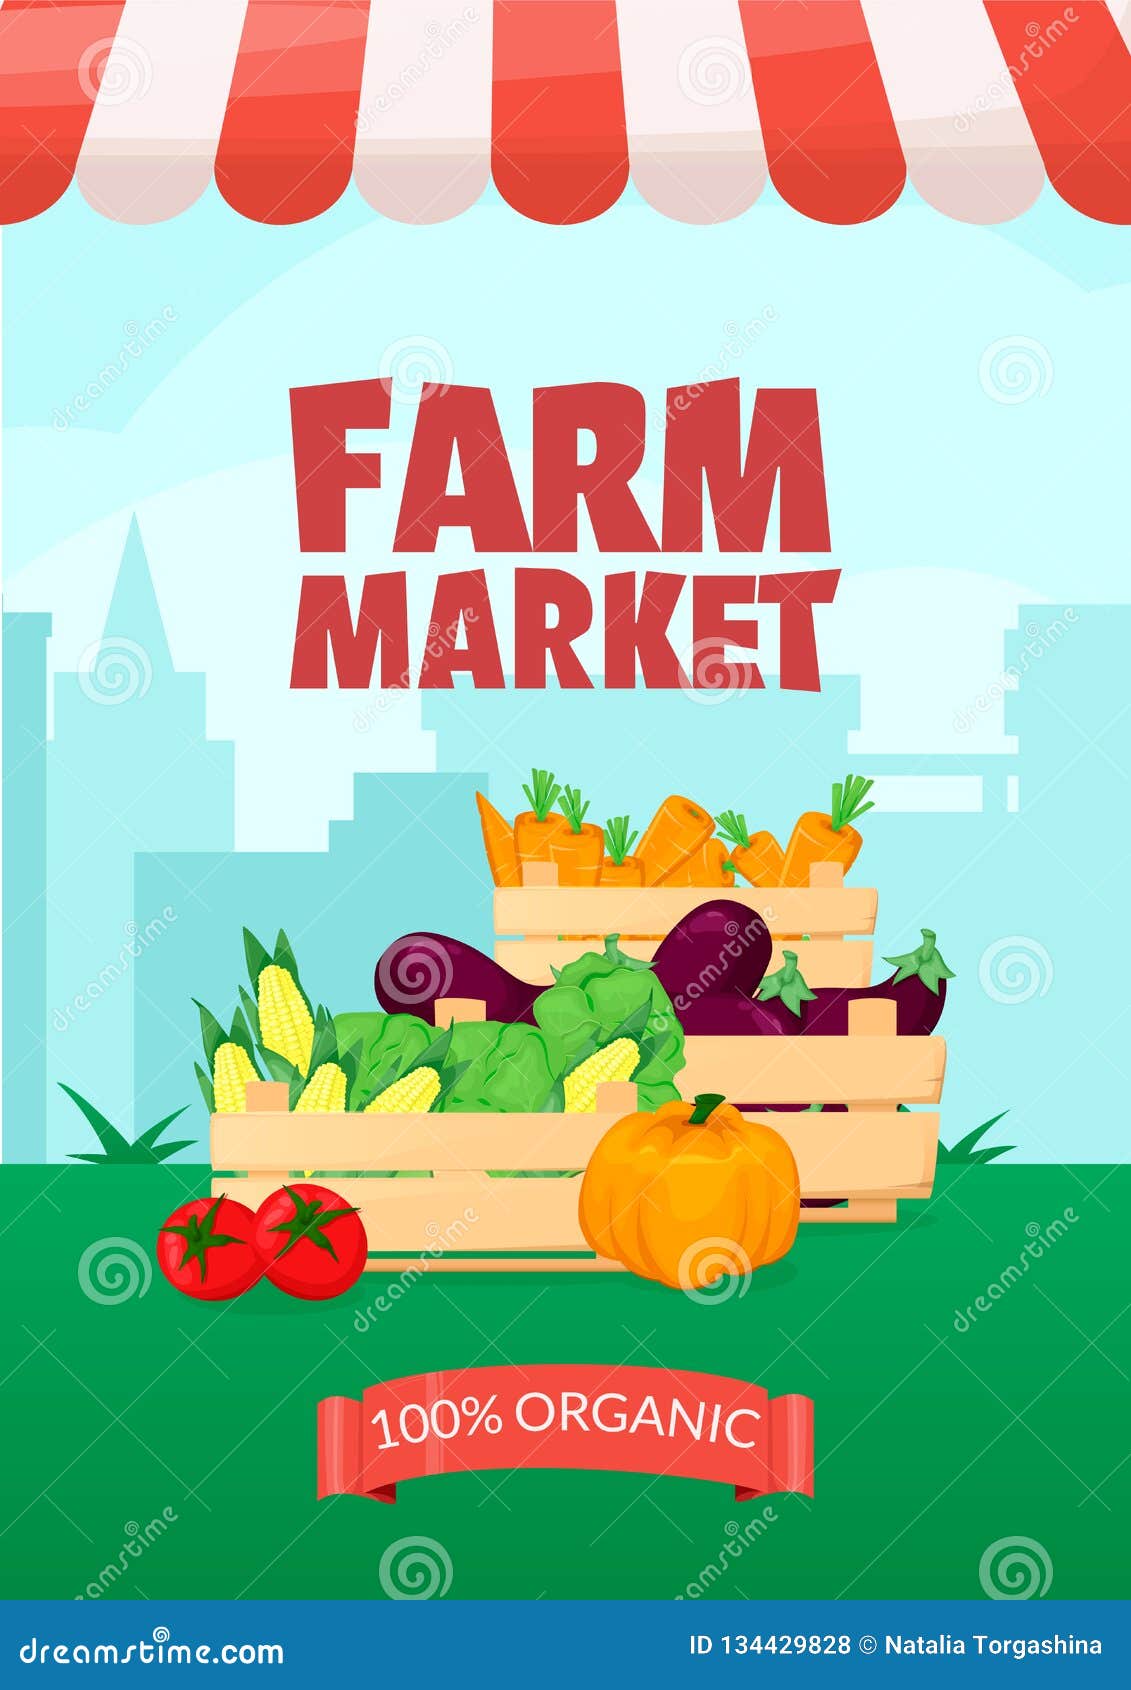 Banner Template for Farmers  Organic Local Shop. Selling Fruit  and Vegetables. Produce Stands Stock Vector - Illustration of concept,  clipart: 134429828